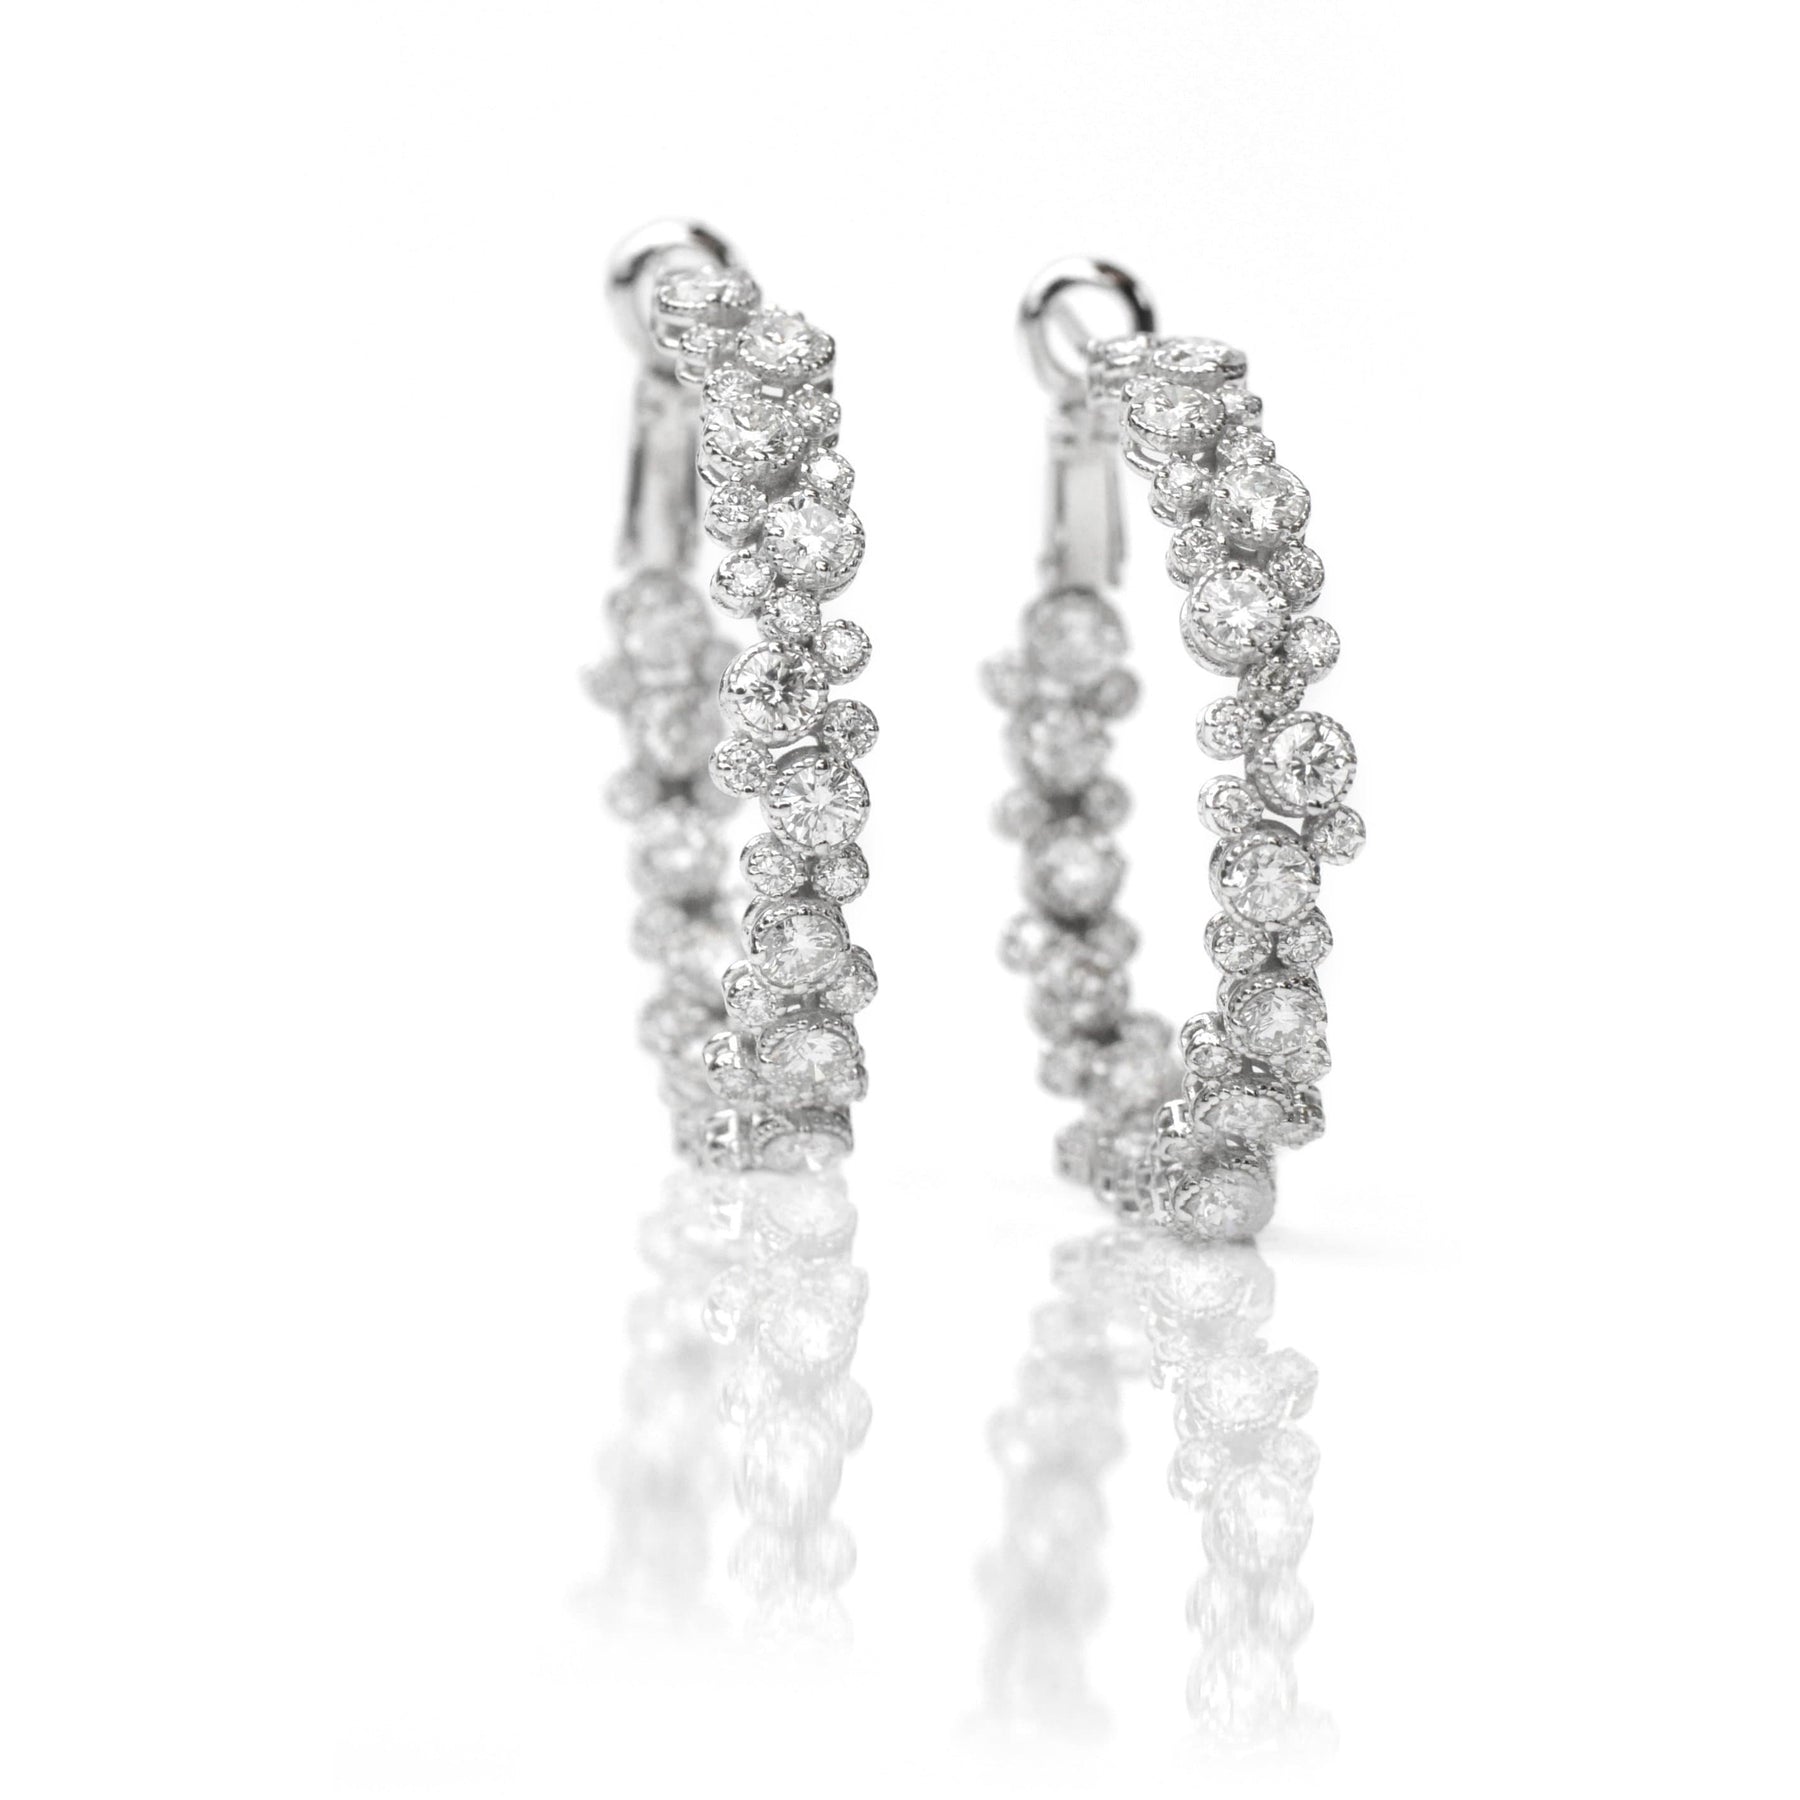 DIAMOND EARRINGS - CHRONICLE - Chris Aire Fine Jewelry & Timepieces